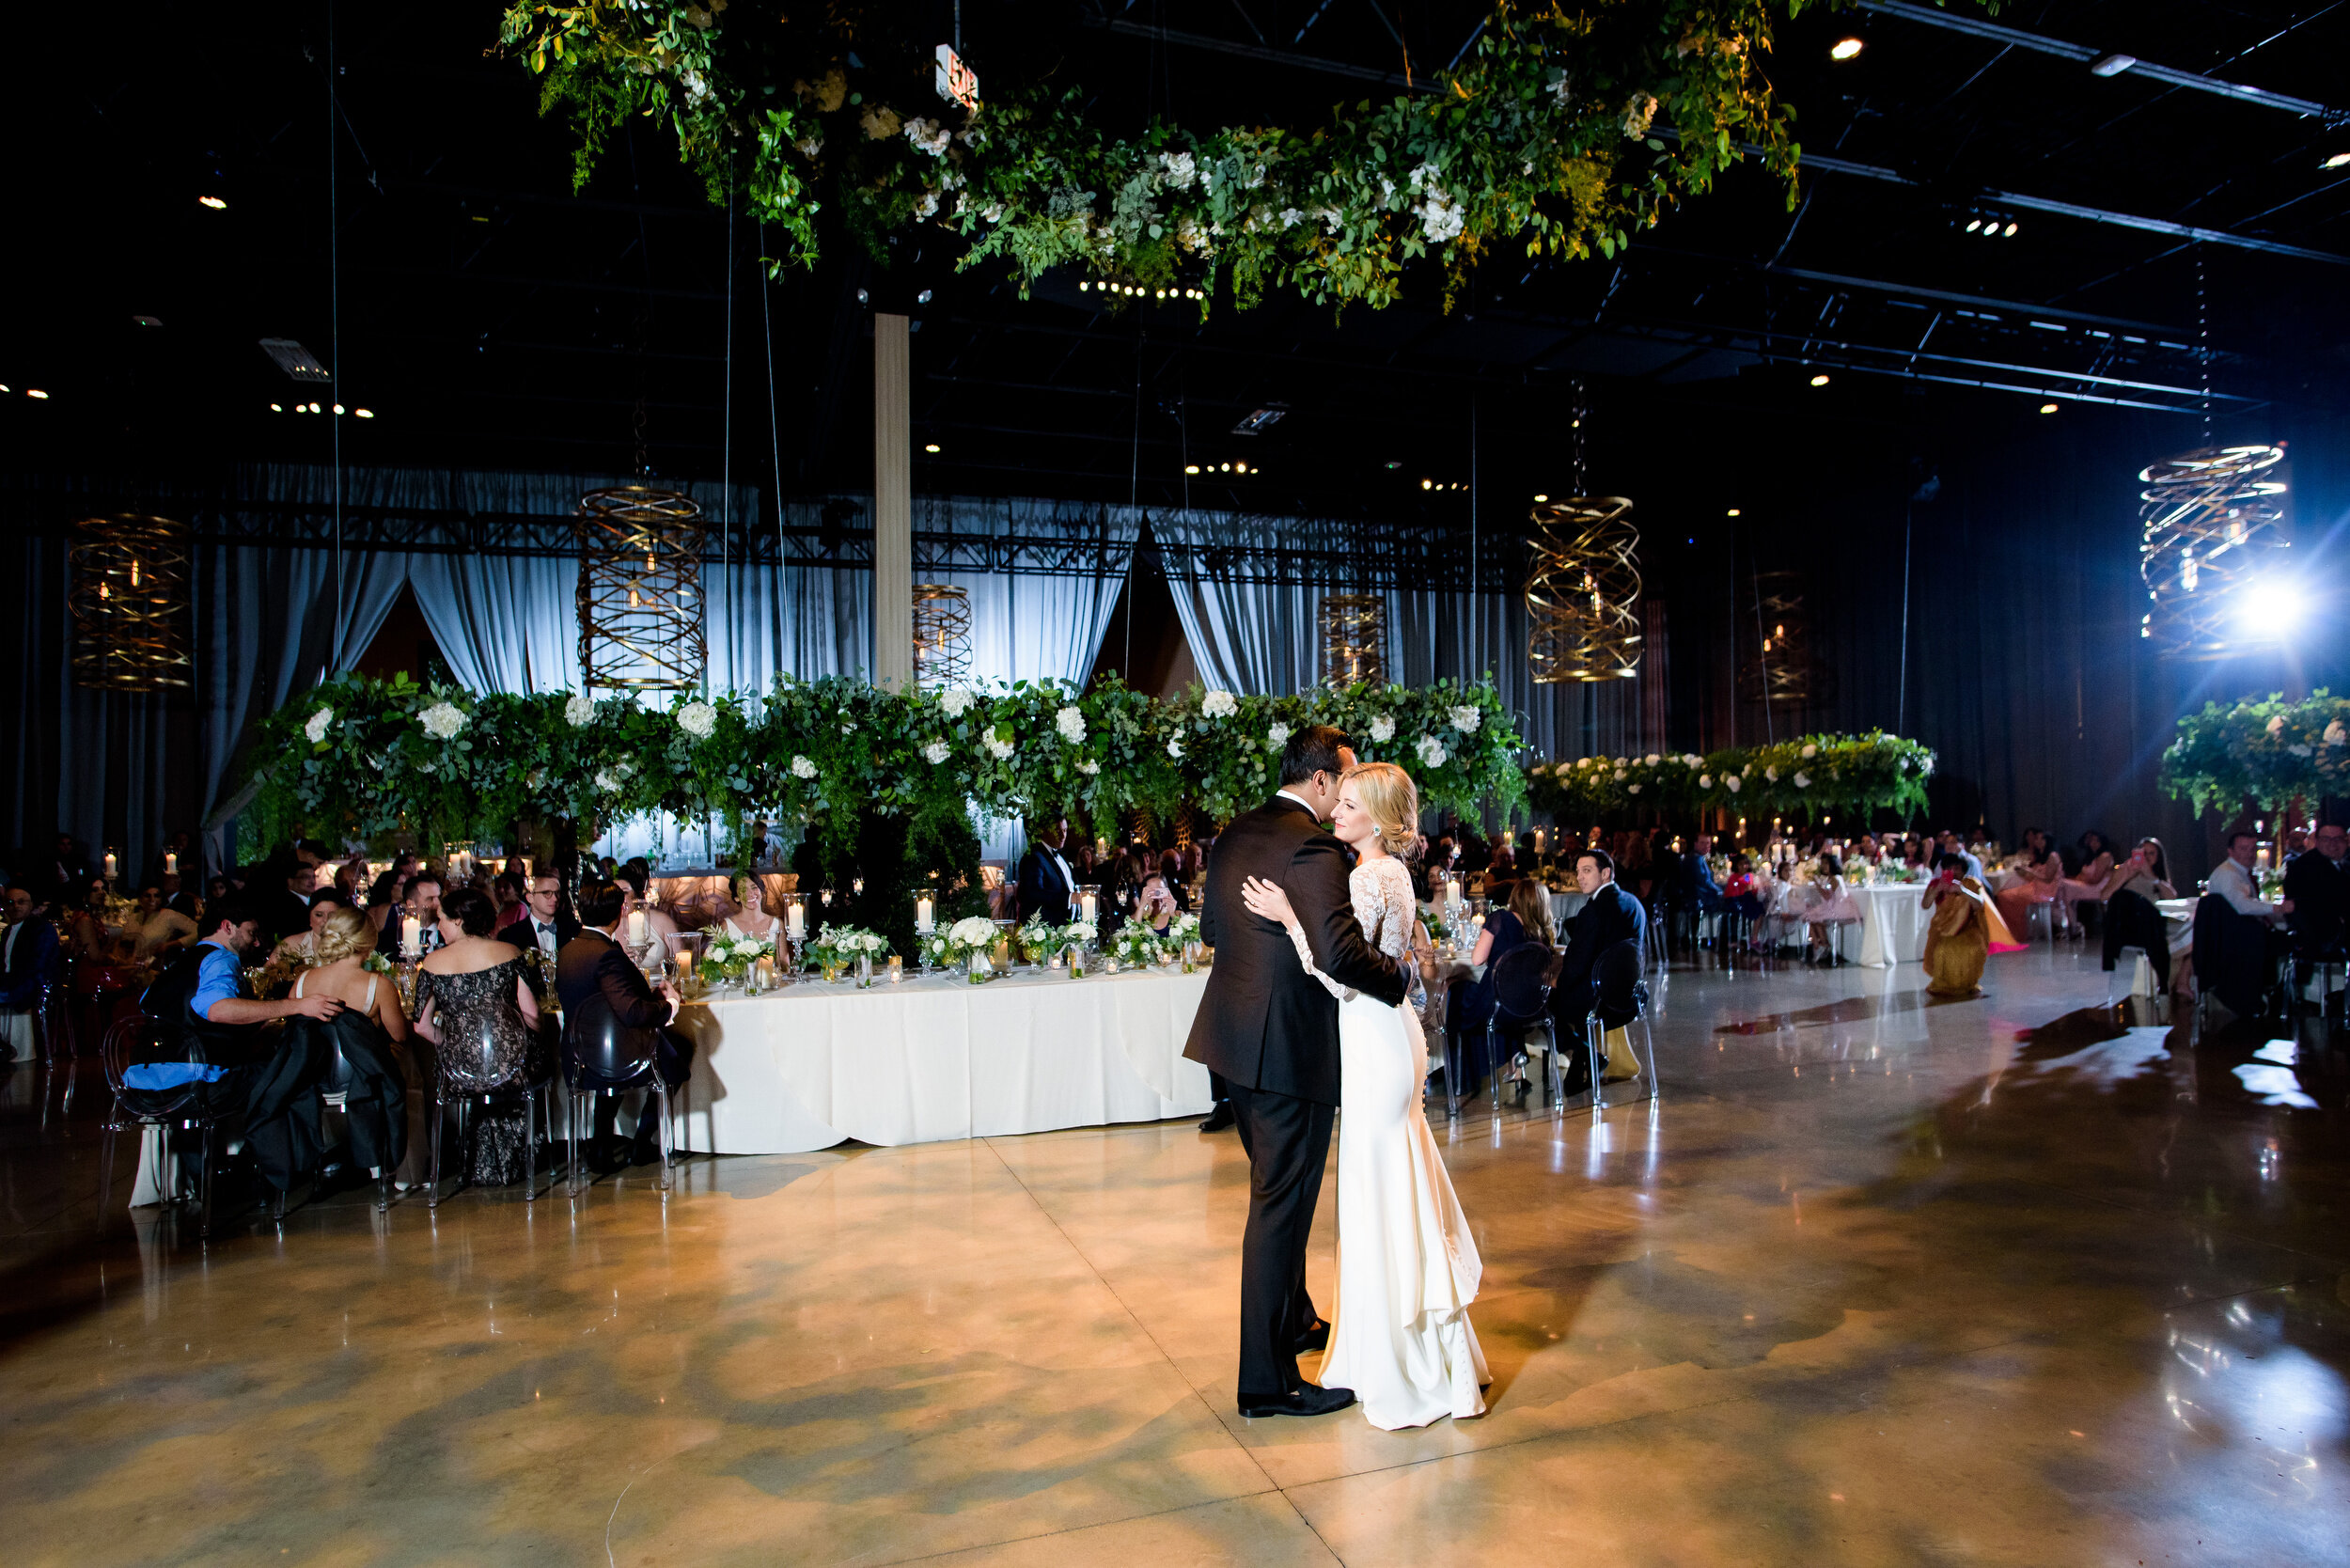 Couple's first dance at the wedding reception: Geraghty Chicago wedding photography by J. Brown Photography.